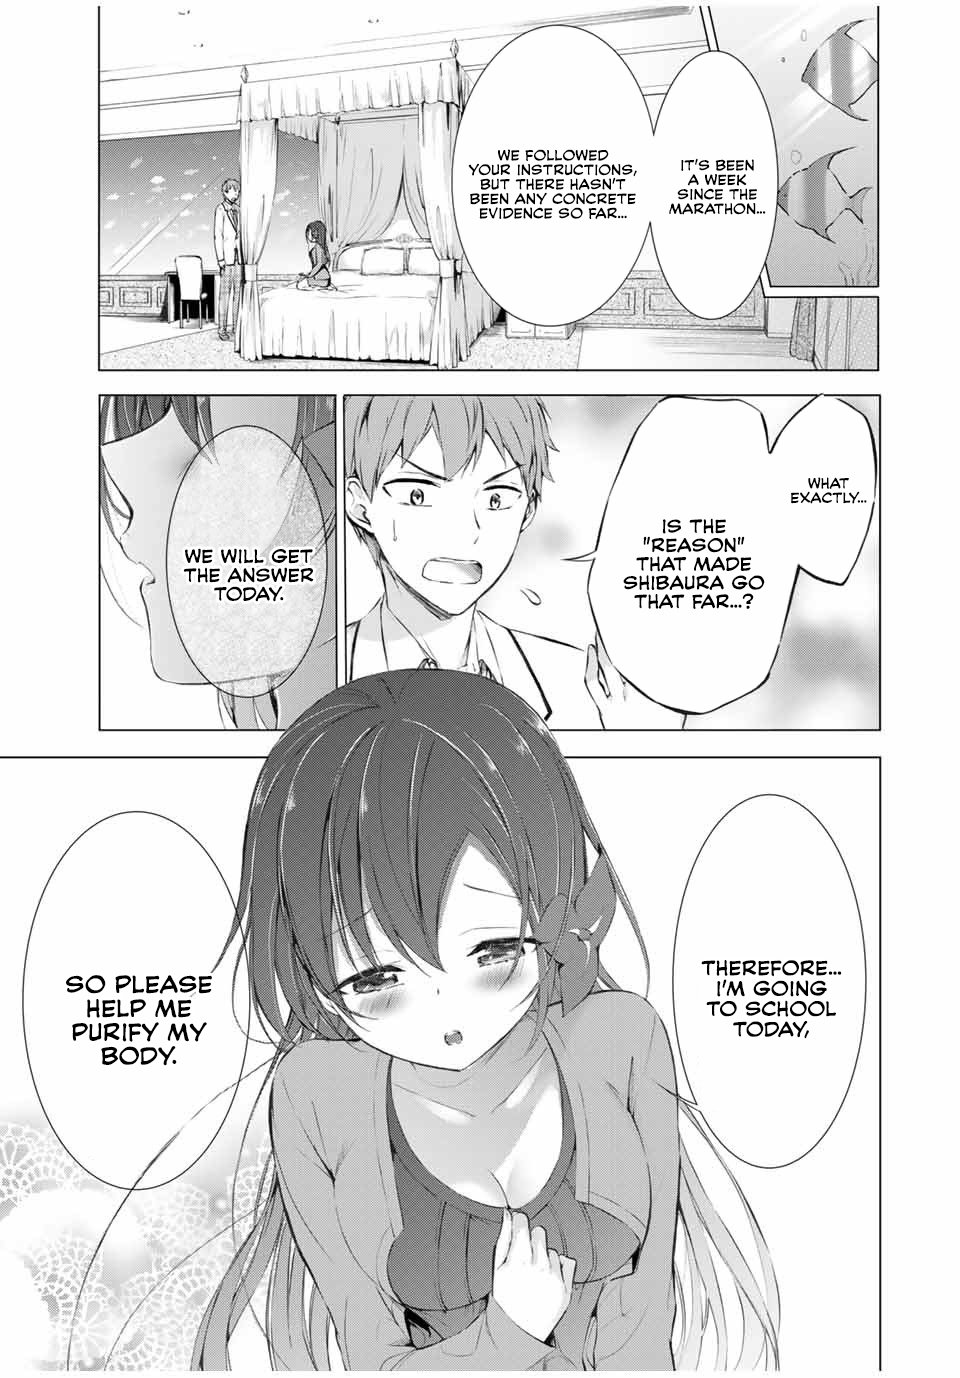 The Student Council President Solves Everything on the Bed vol.2 ch.5.1